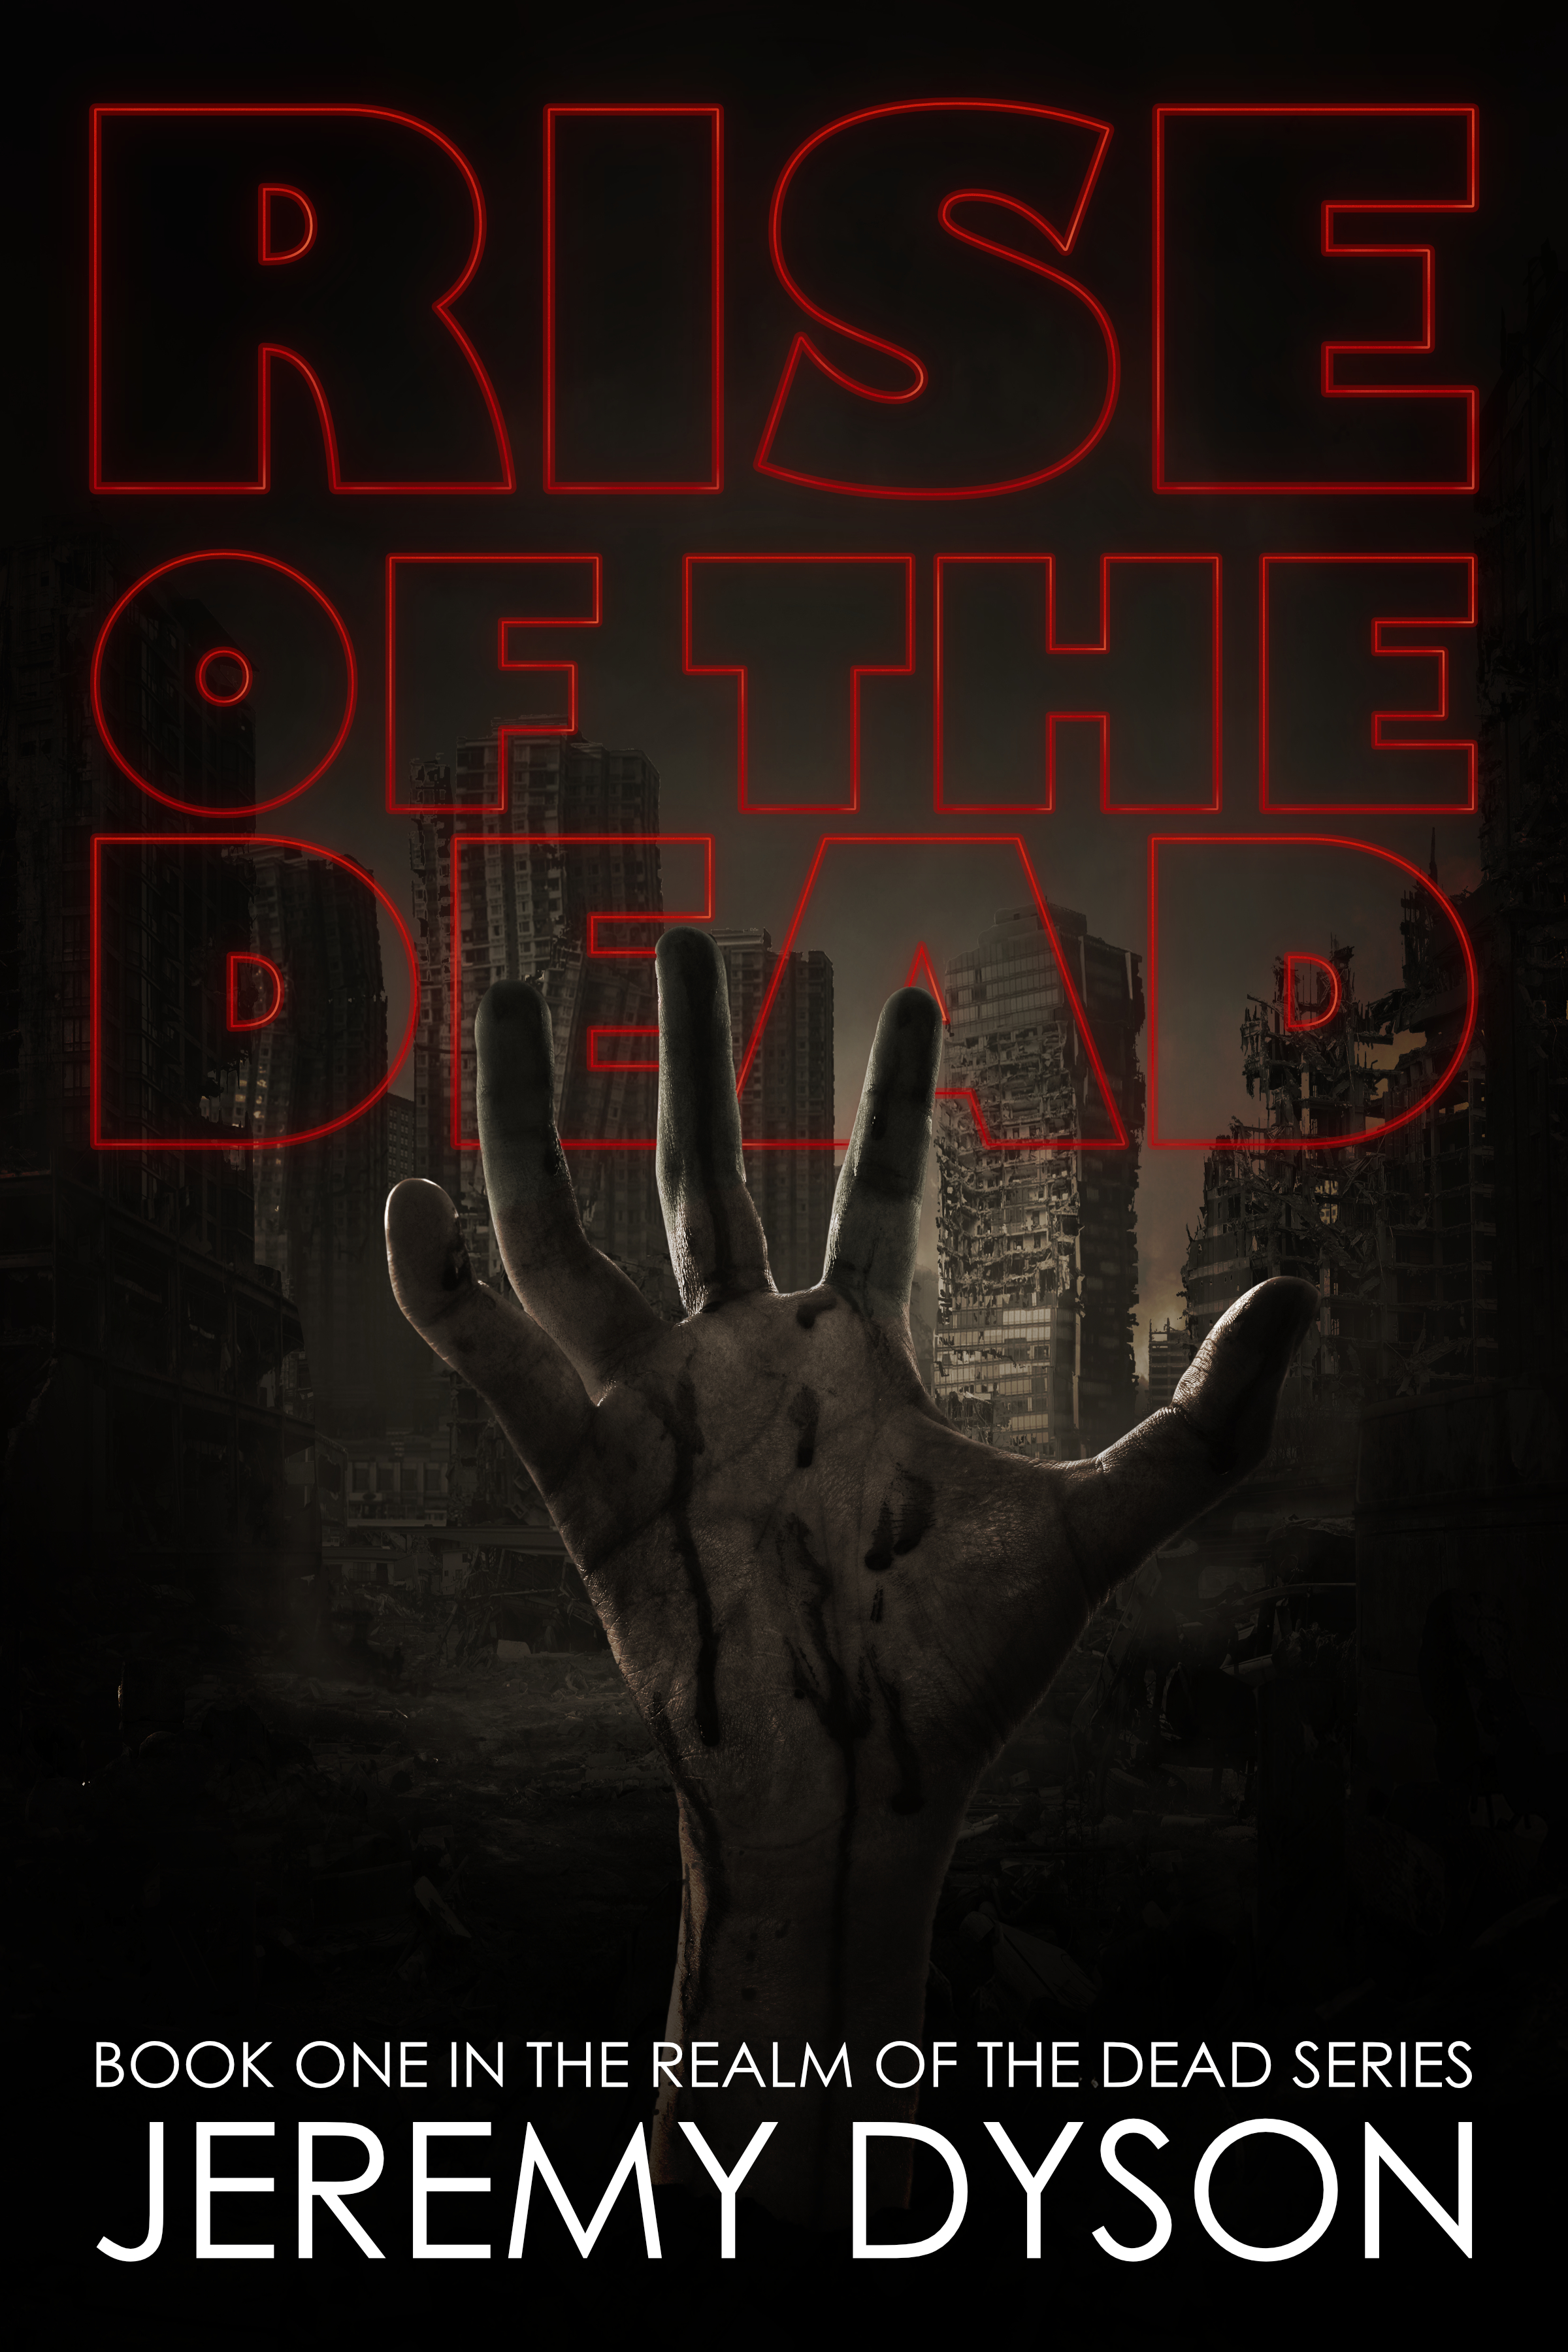 99-rise-of-the-dead-ebook-cover.jpg